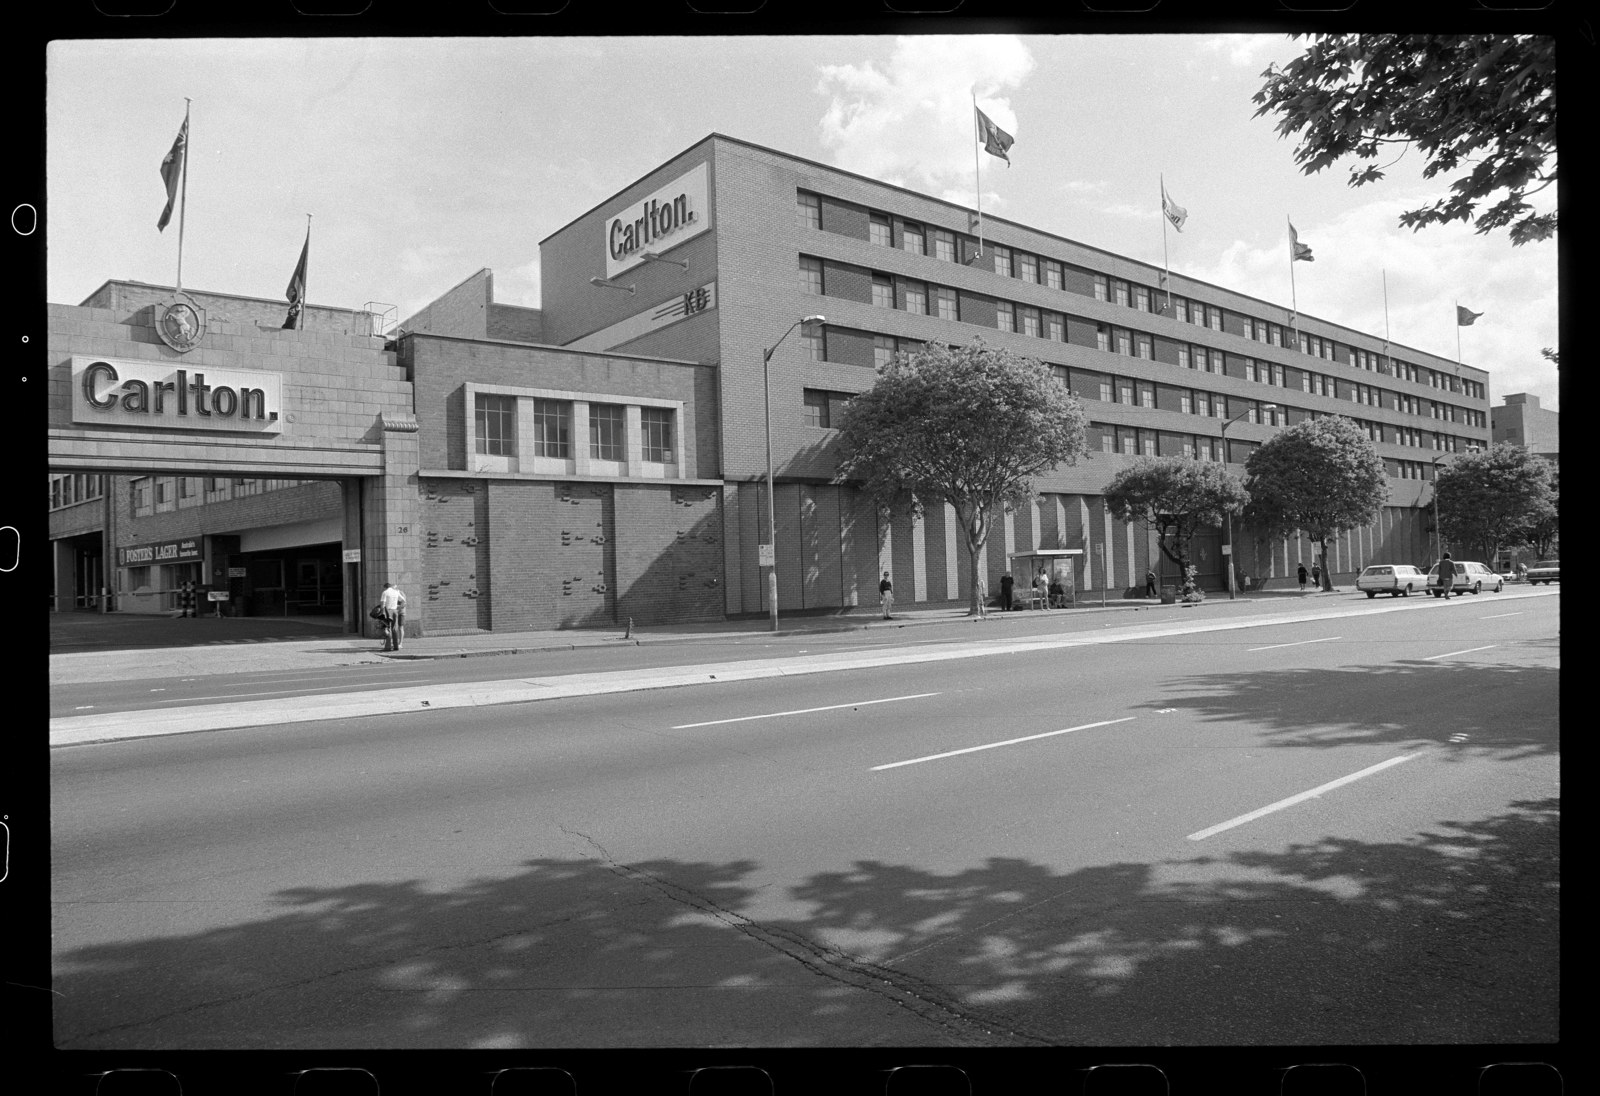 B&W image of a 5 storey building with â€˜Carltonâ€™ sign and logo above the vehicle entry. Flags are flown on the building.